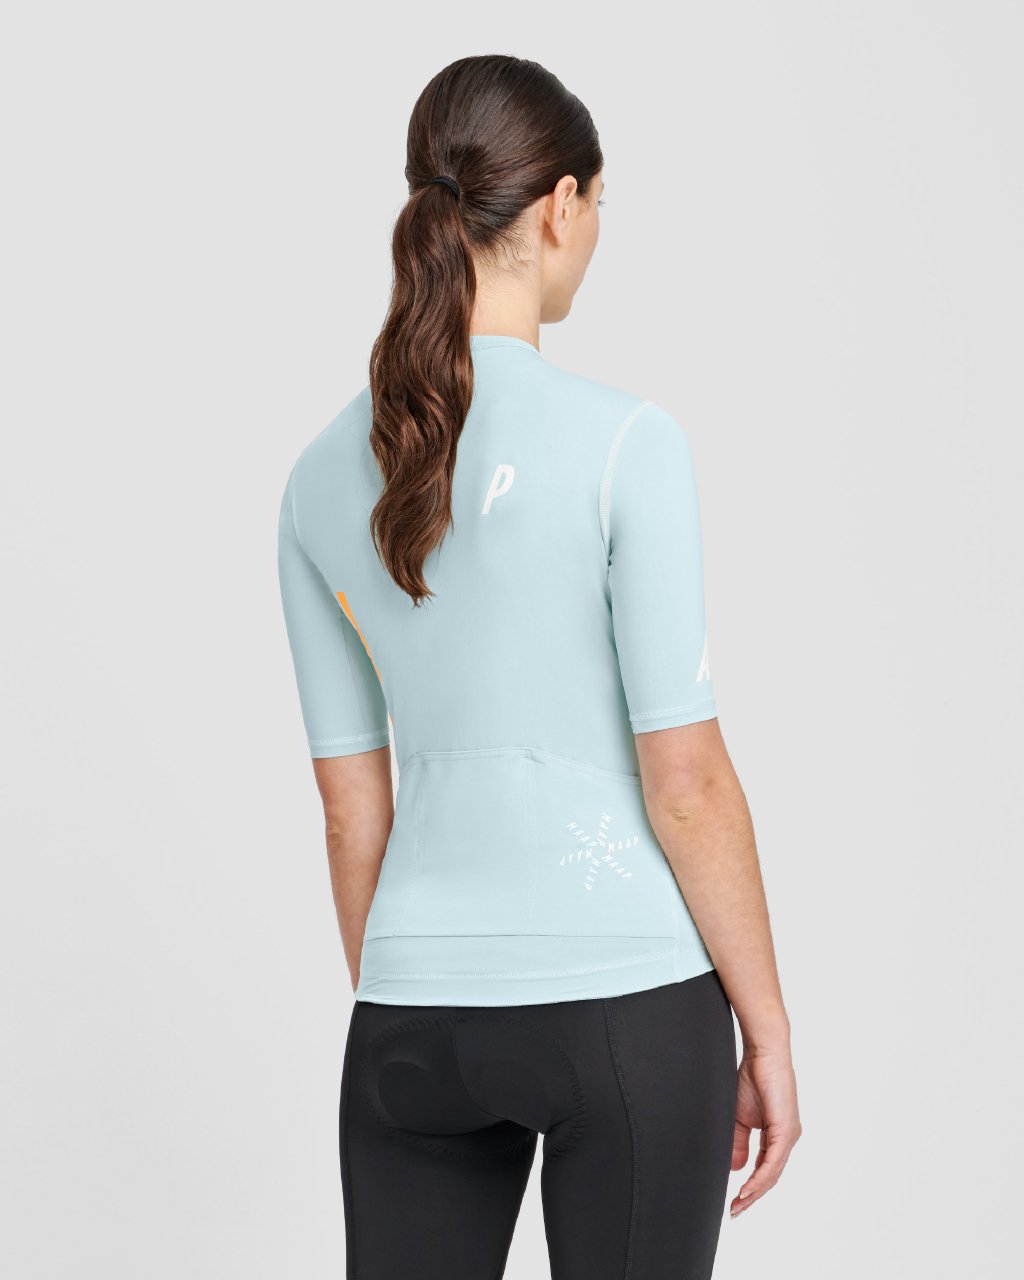 Maap Women's Training Jersey - Maillot ciclismo - Mujer